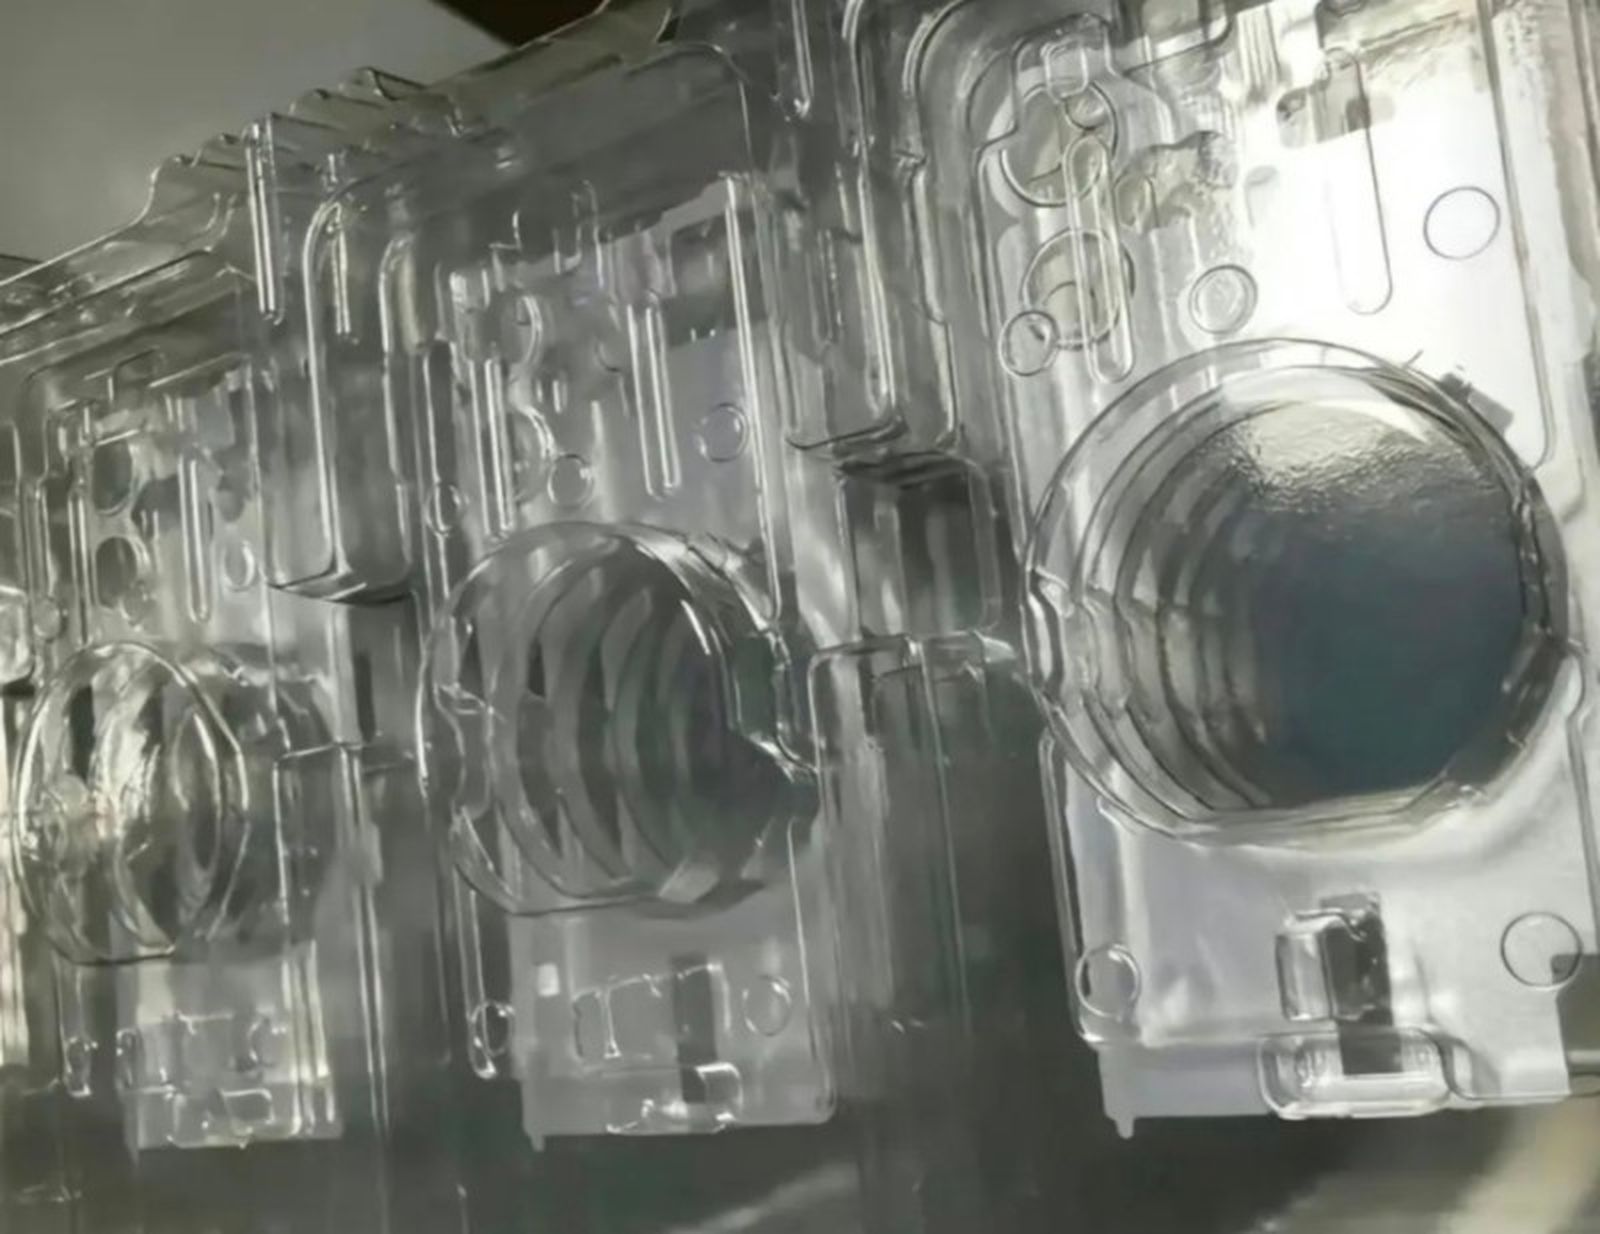 Molds of what appear to be the base model iPhone 16 showing a vertical camera layout.